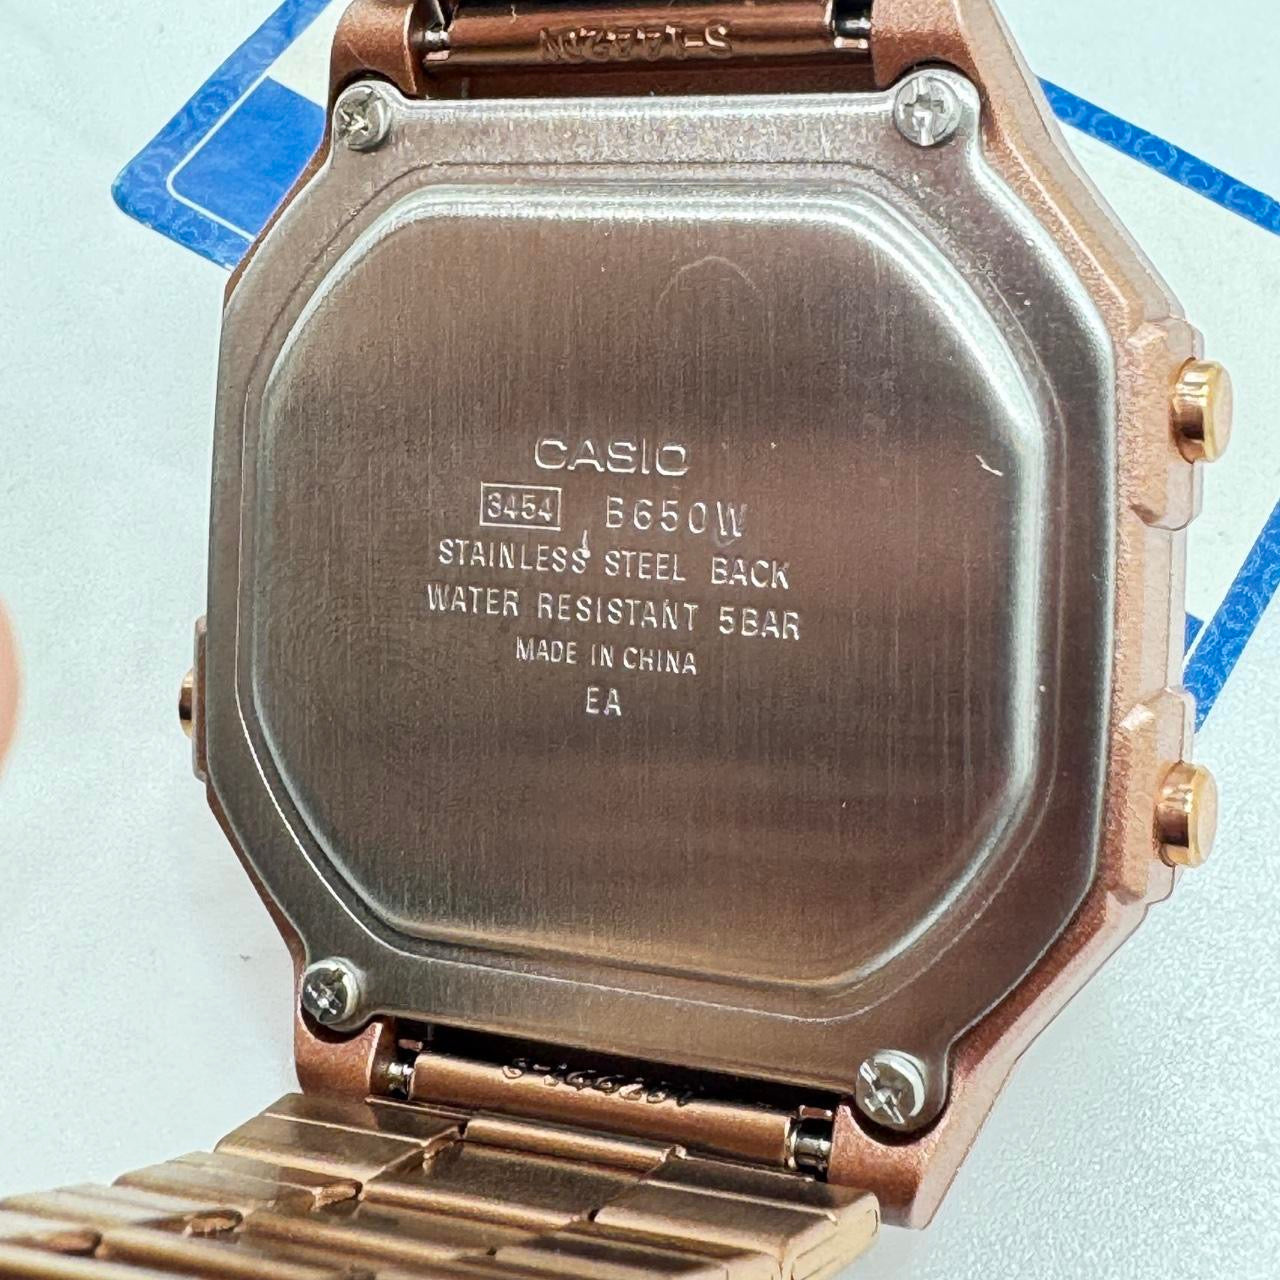 Casio Copper Color  Watch , Men Wrist Size , Adjustable Band , Band Expand up to 8 inches Long, 38mm  Diameter   New Item